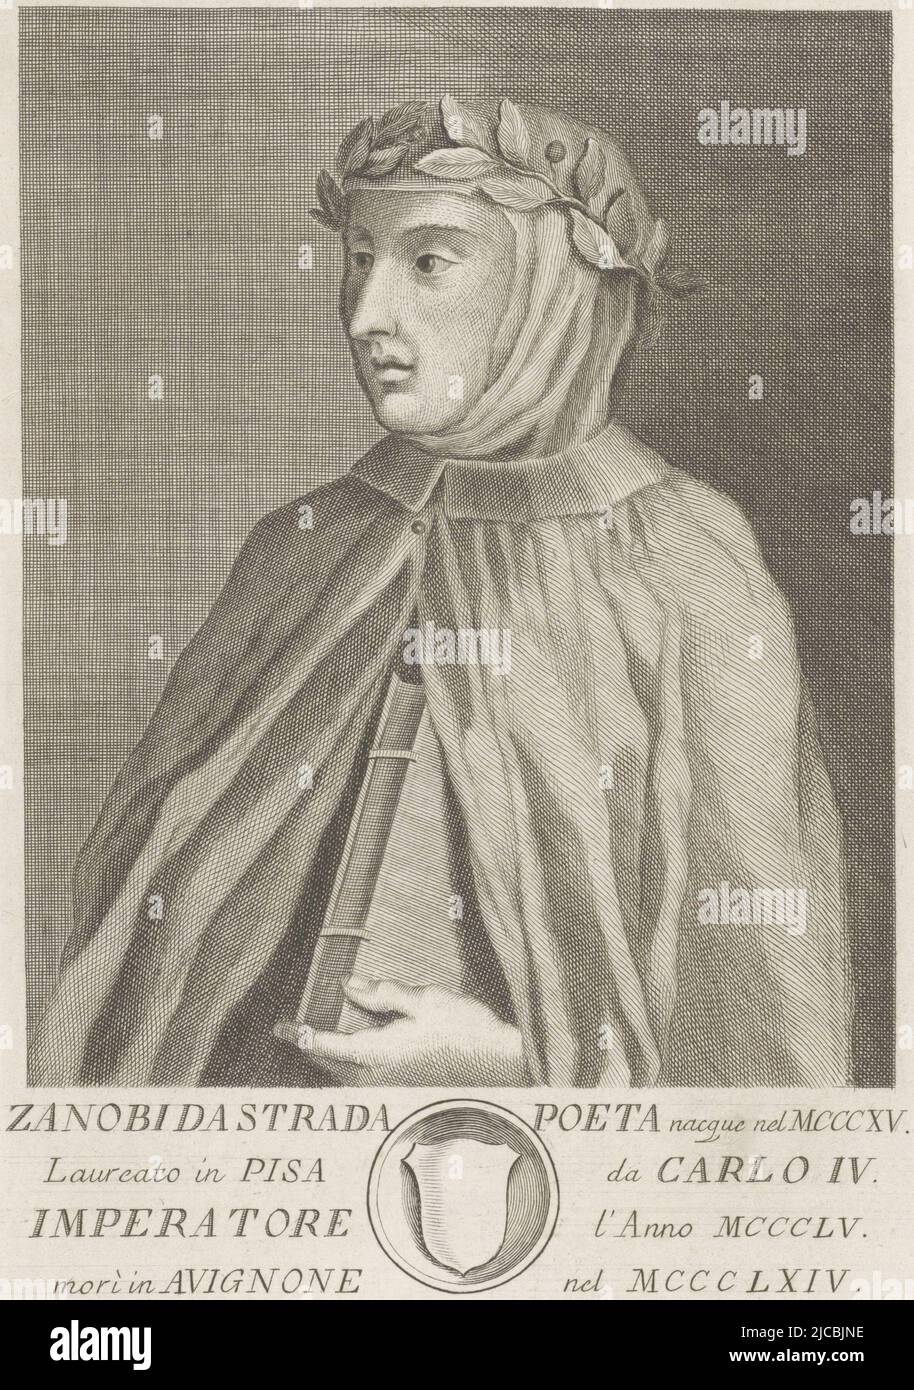 Portrait of Zanobi da Strada, with a lariat wreath on his head and a book under his arm Below the portrait a text in Italian and a coat of arms in a circular frame, Portrait of Zanobi da Strada Portraits of famous Italians with coat of arms in lower margin , print maker: Francesco Allegrini, (mentioned on object), intermediary draughtsman: Giuliano Traballesi, (mentioned on object), Lorenzo Ottavio del Rosso, (mentioned on object), Italy, 1761, paper, engraving, h 291 mm × w 187 mm Stock Photo